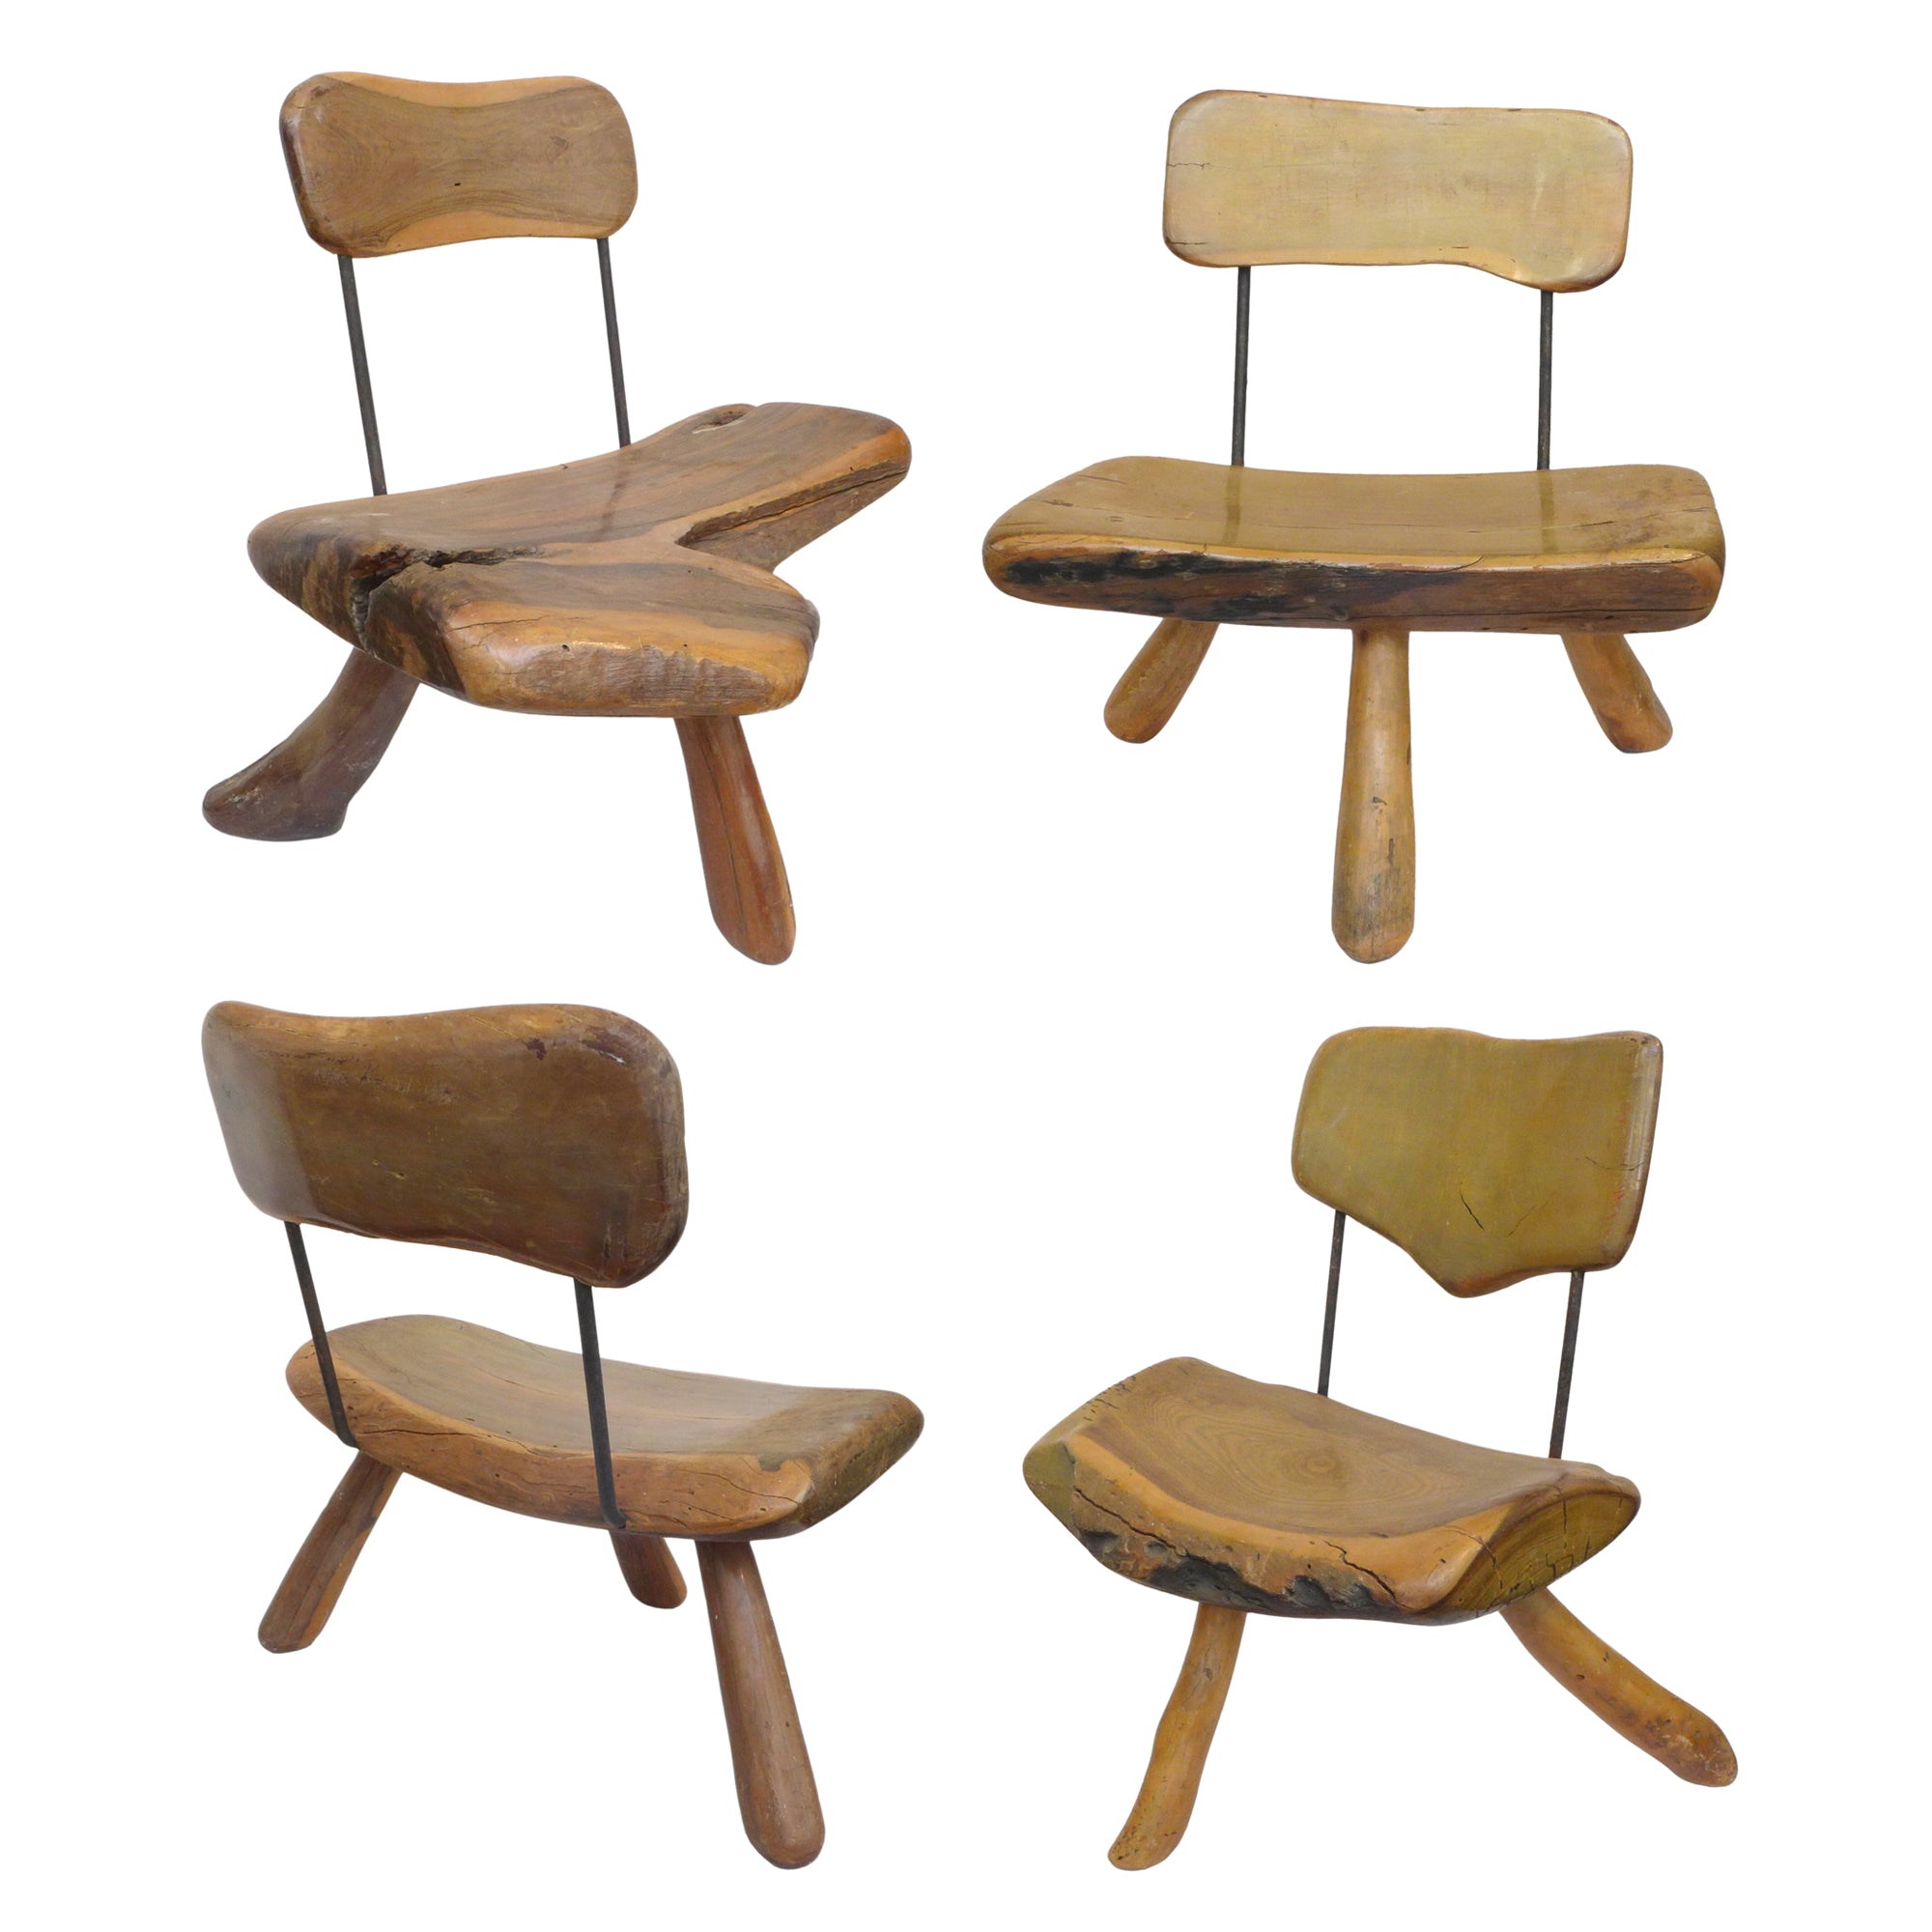 Set of 4 Mexican Organic Wood Chairs after Sabina